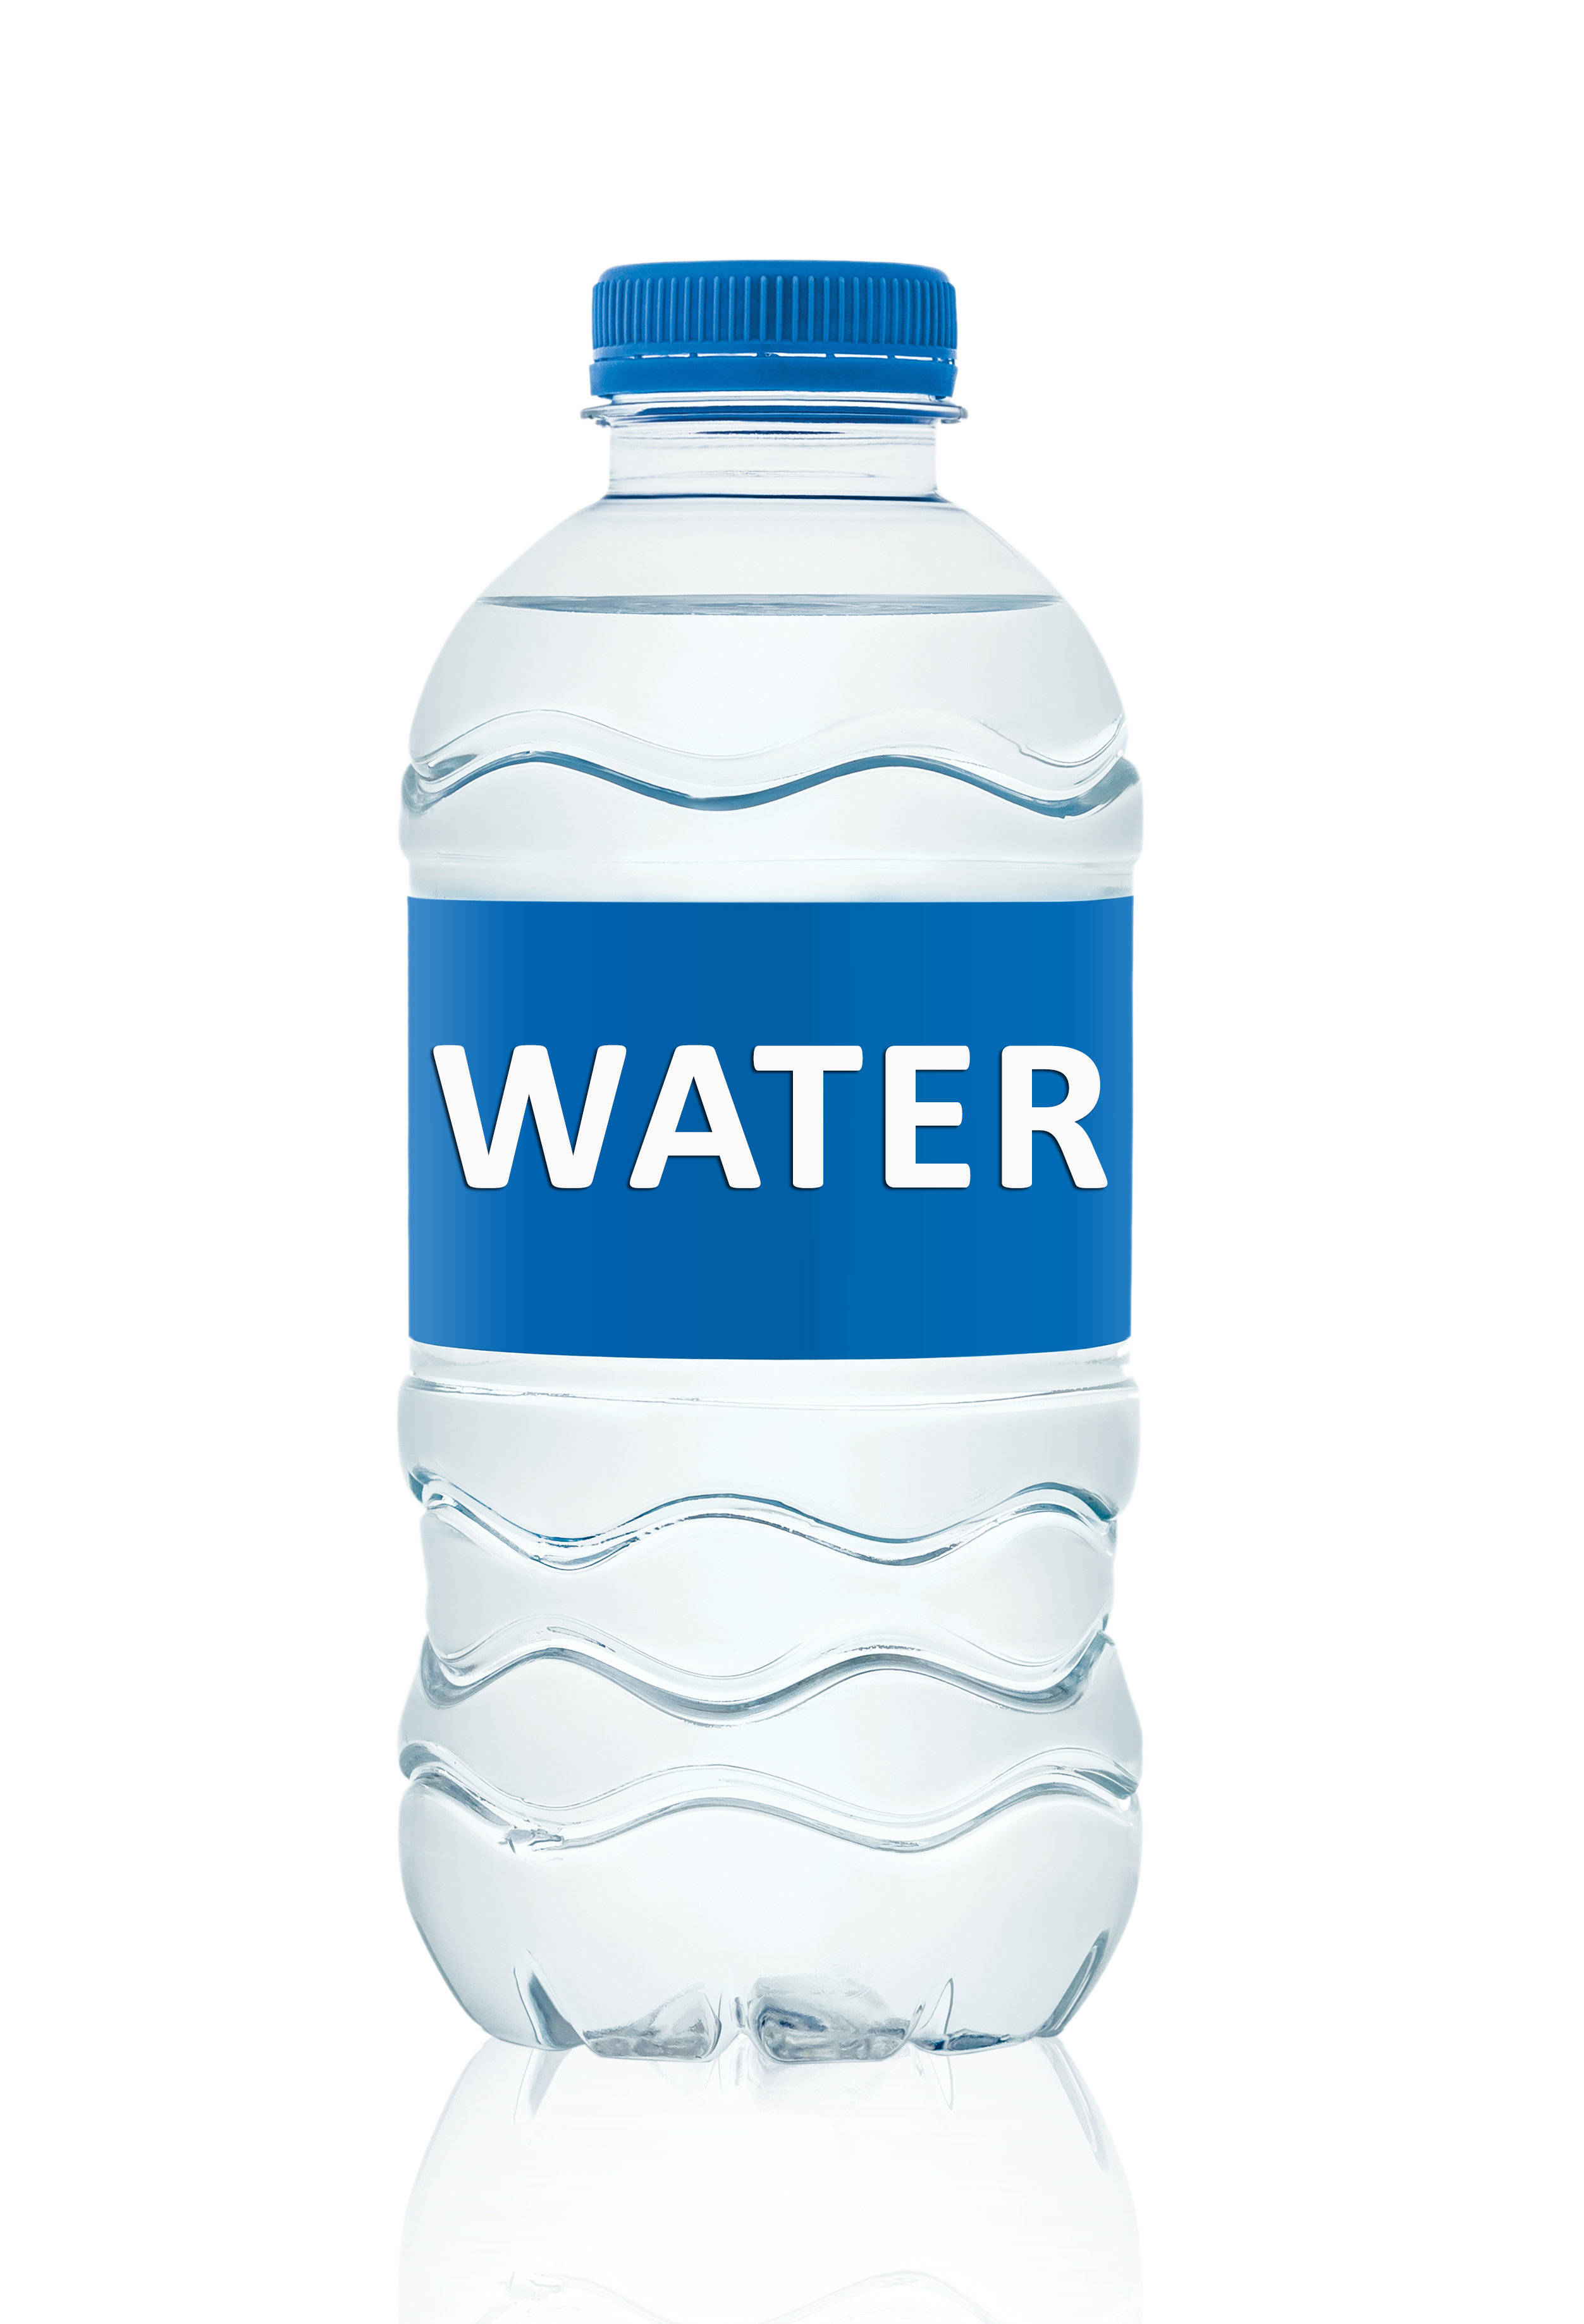 Water Bottle PNG Image in Transparent - Water Bottle Png